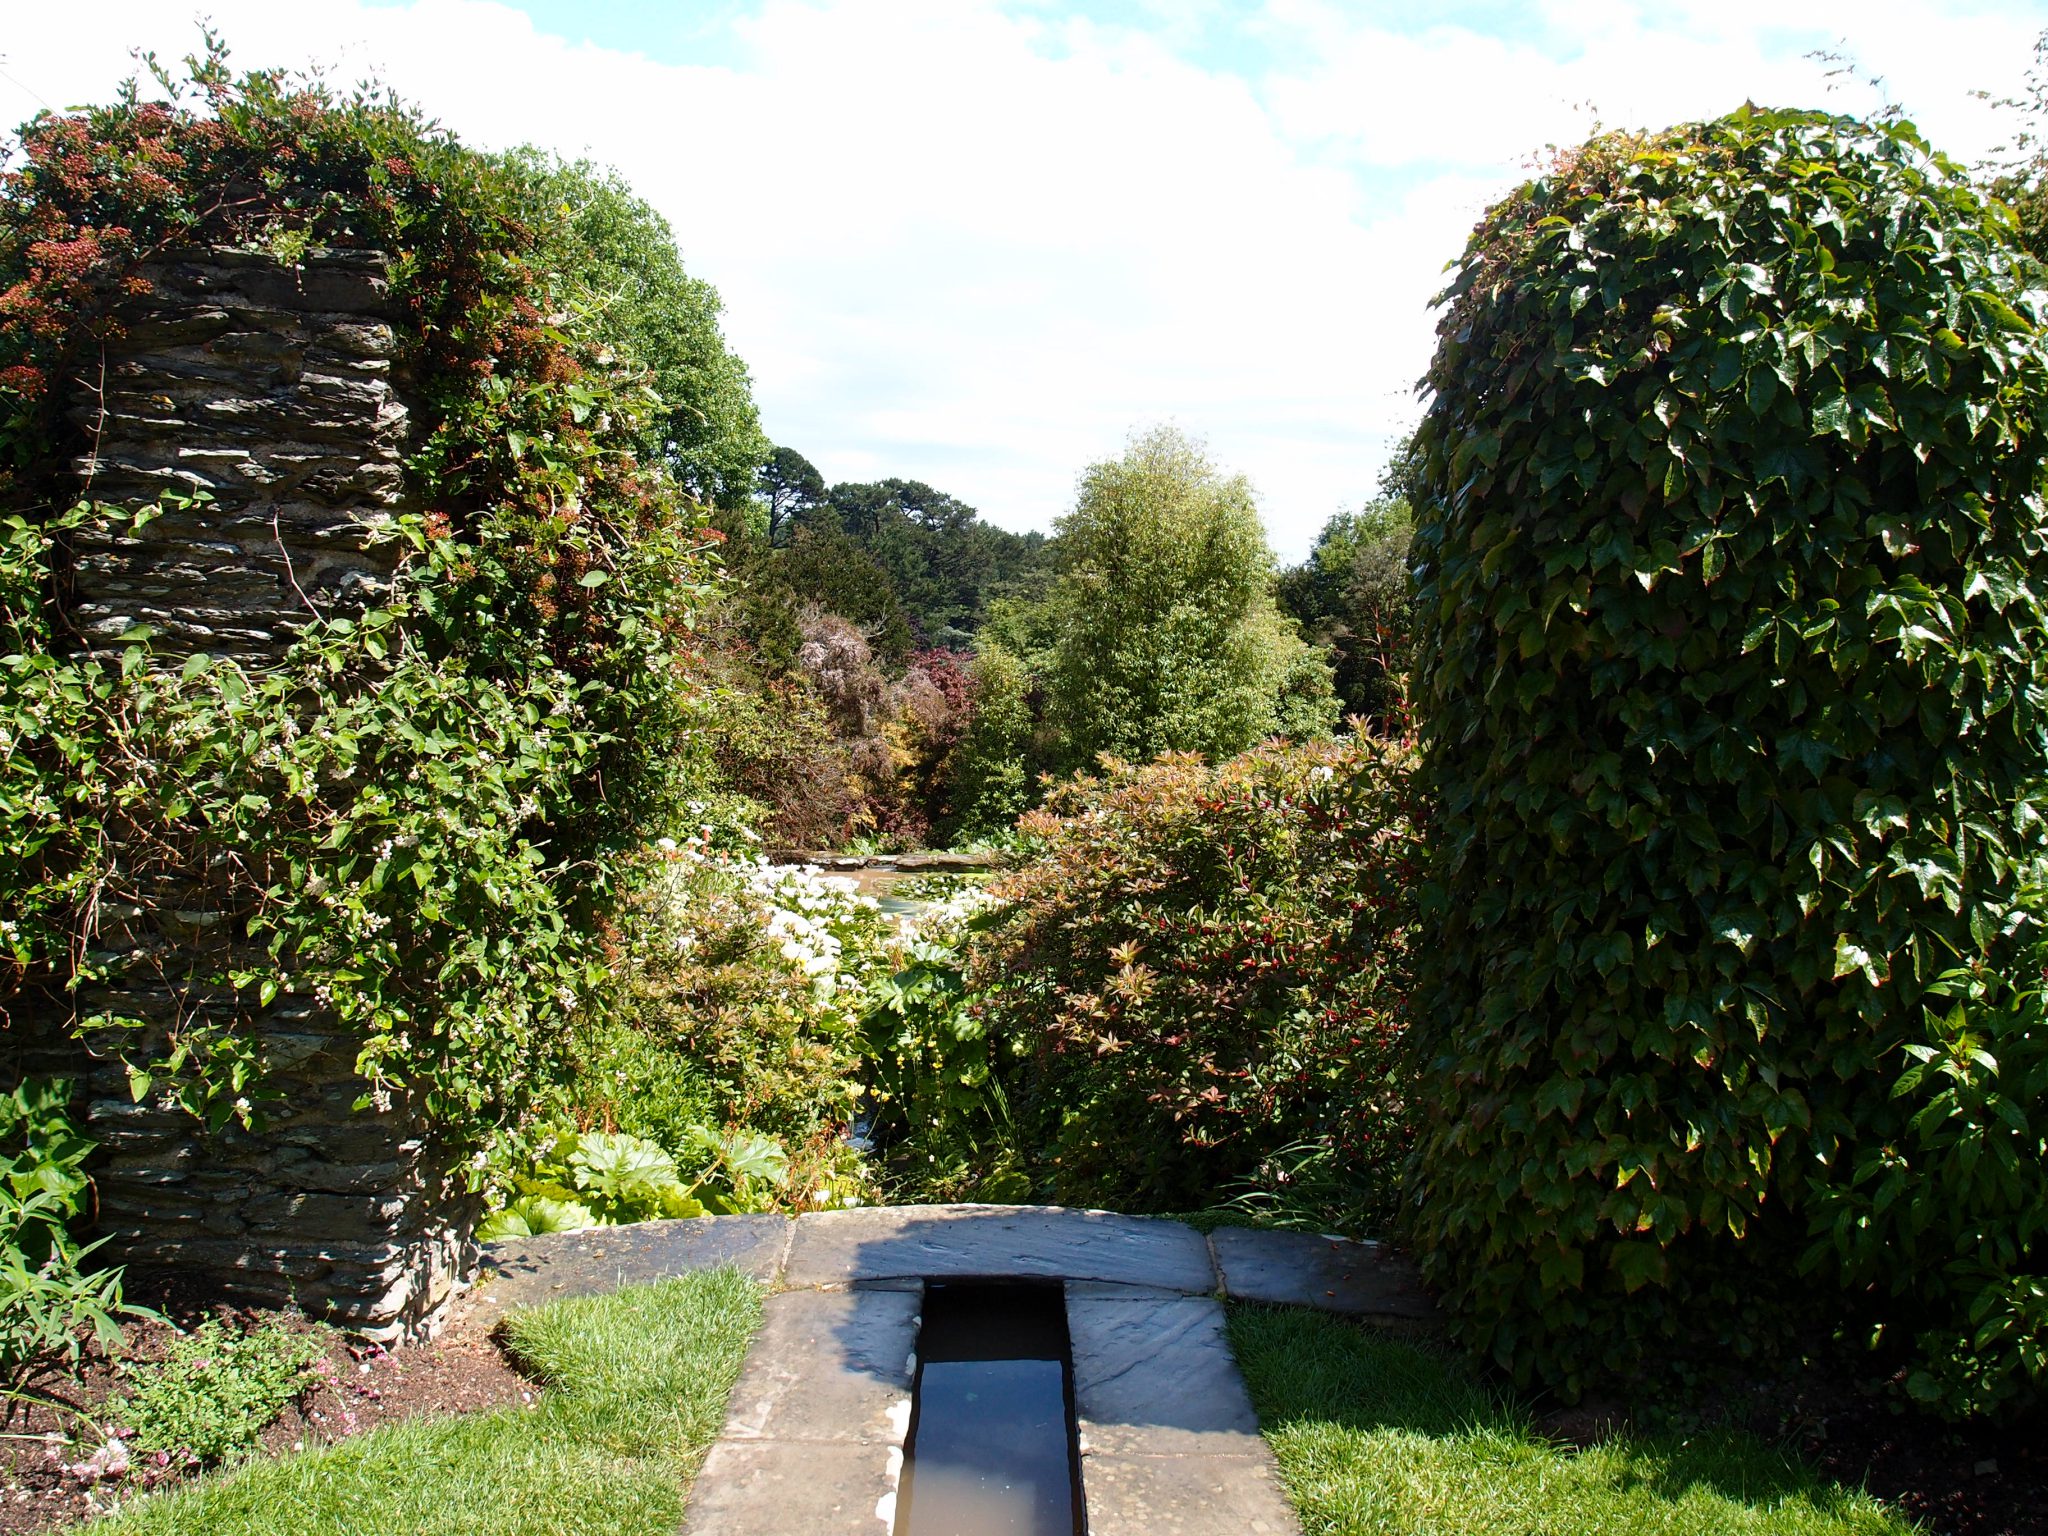 A sunny-afternoon view from the Rill Garden, over the Lower Pond